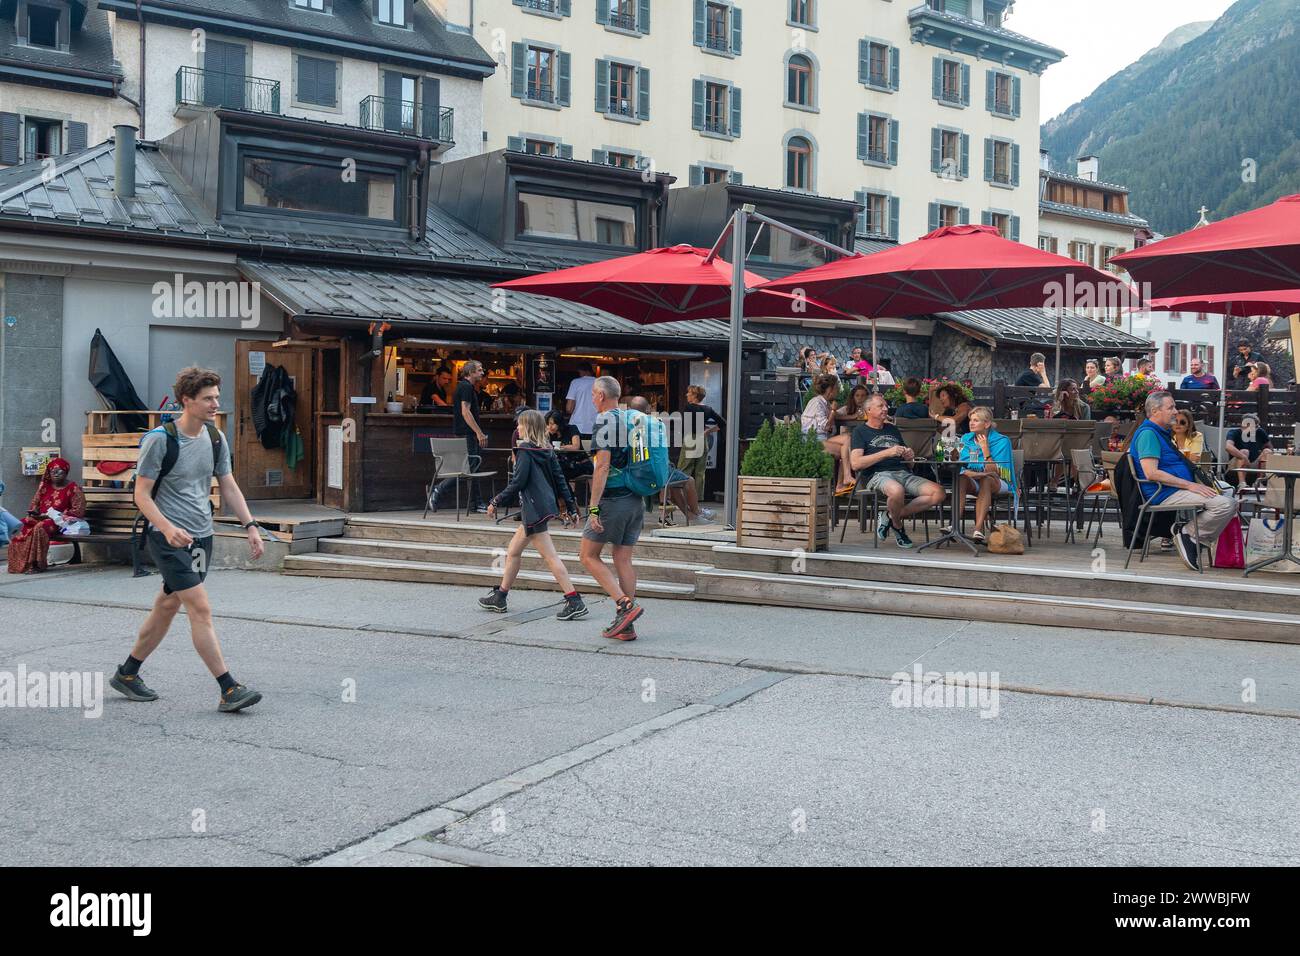 People in an outdoor cafè in the centre of the alpine village in summer, Chamonix, Haute Savoie, Auvergne Rhone Alpes, France Stock Photo